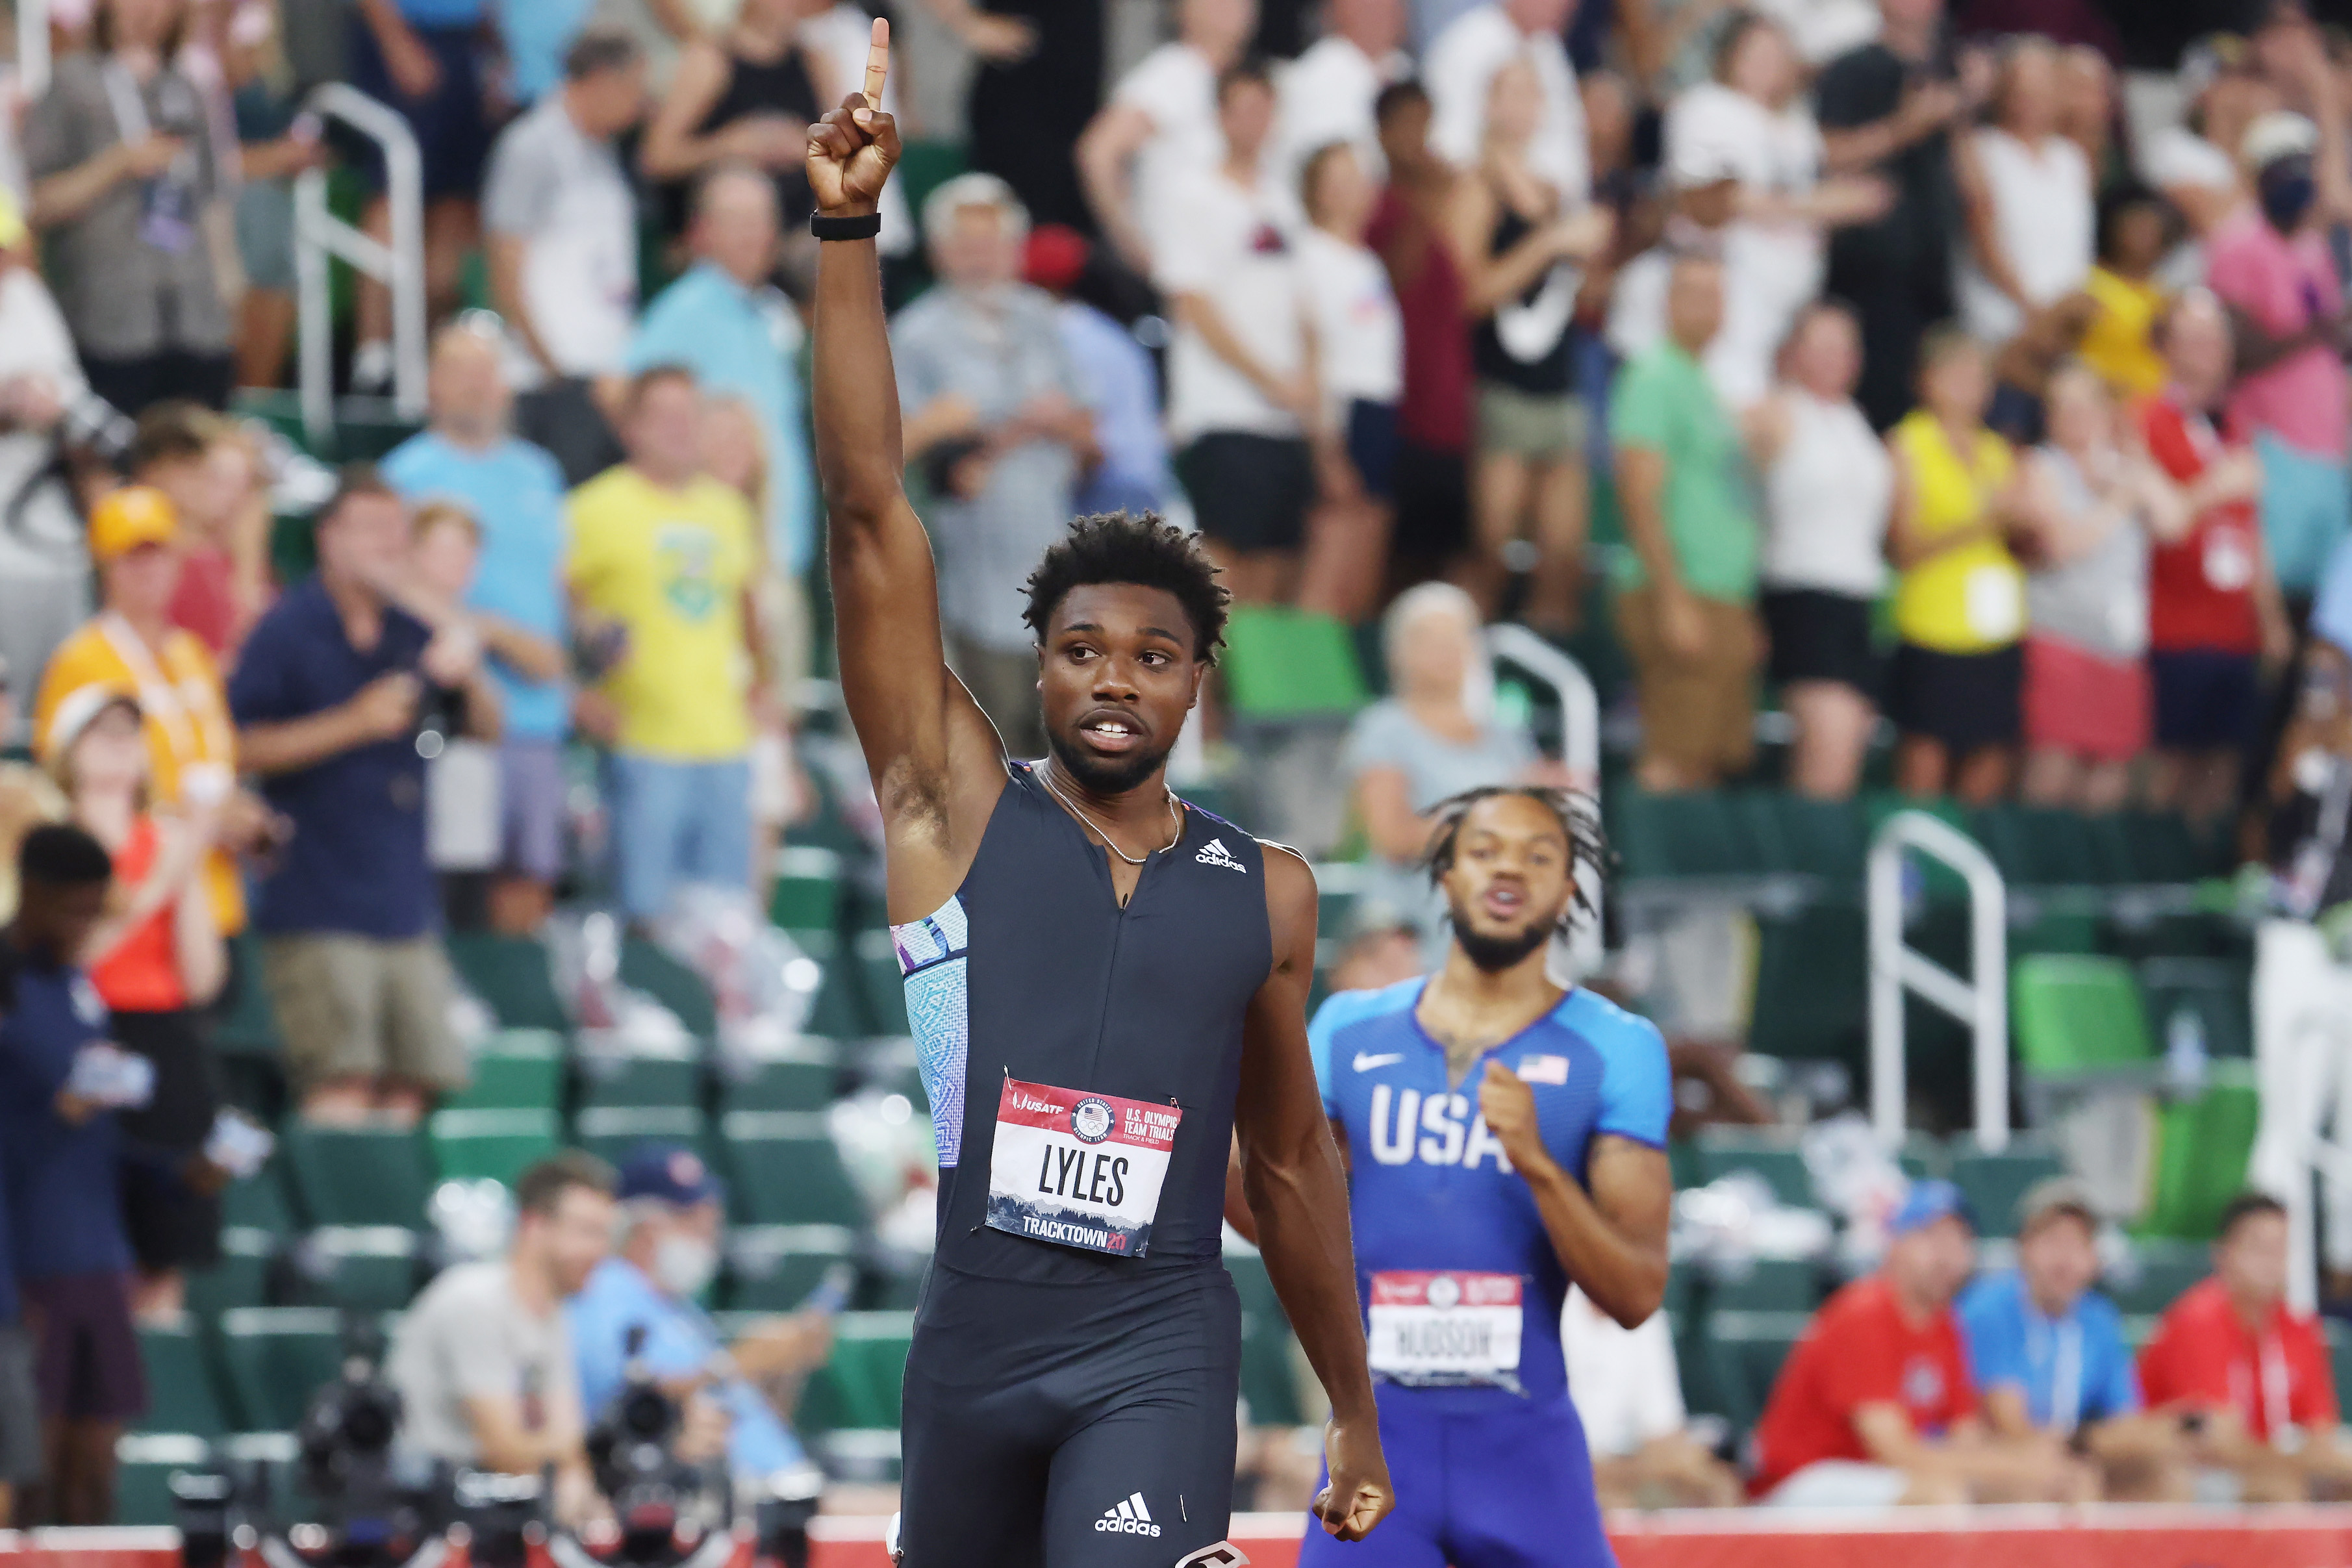 Get to Know Noah Lyles, U.S. Olympian Sprinting the 200m in Tokyo